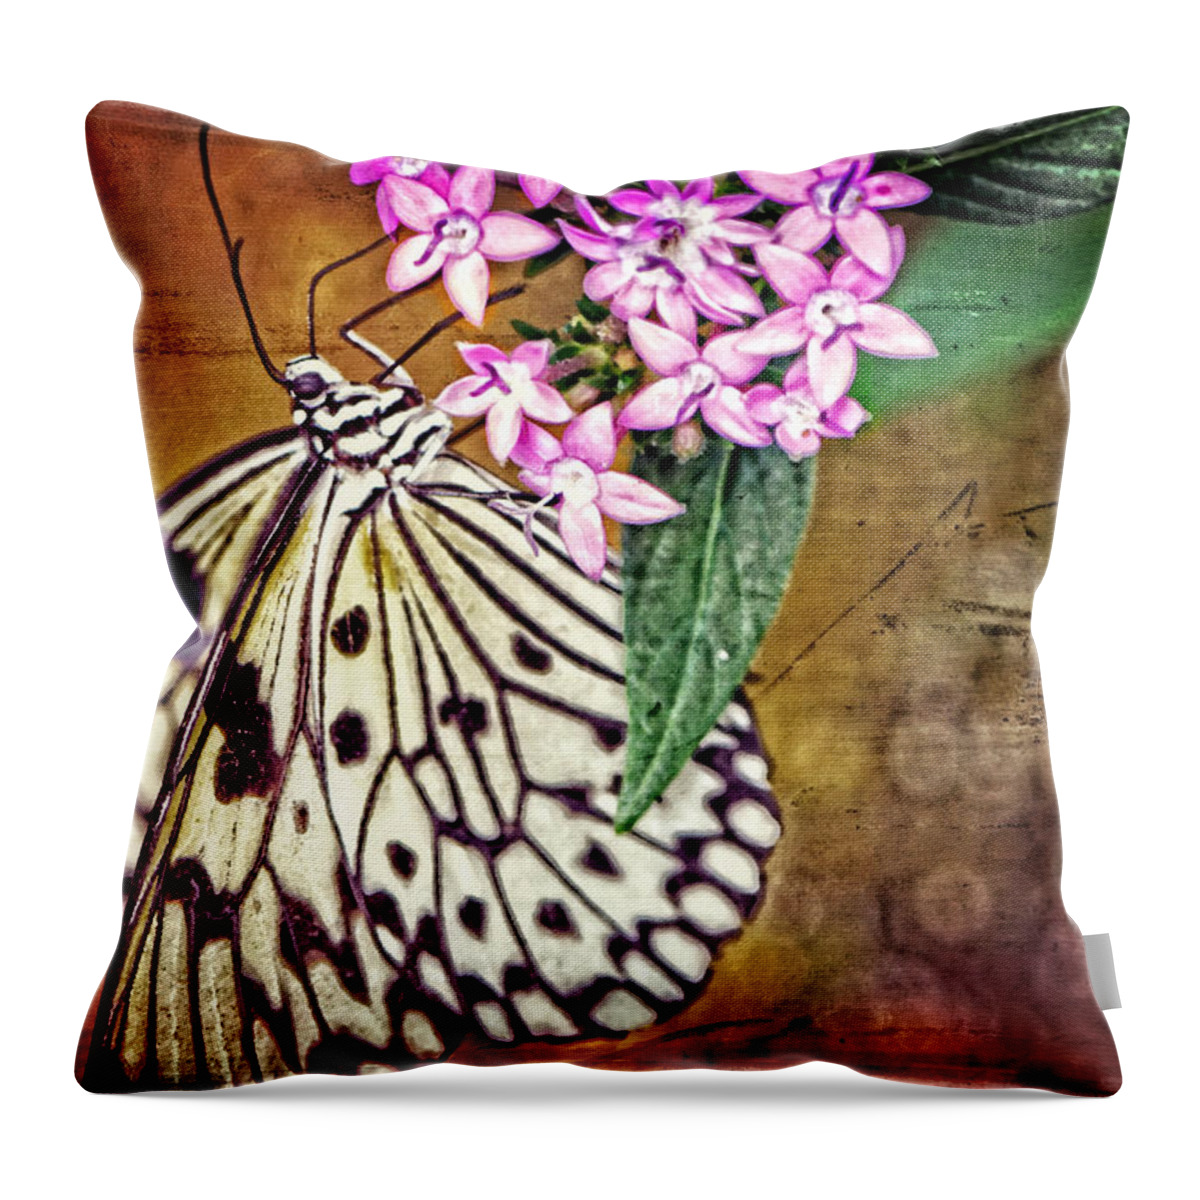 Butterfly Throw Pillow featuring the painting Butterfly Art - Hanging On - By Sharon Cummings by Sharon Cummings